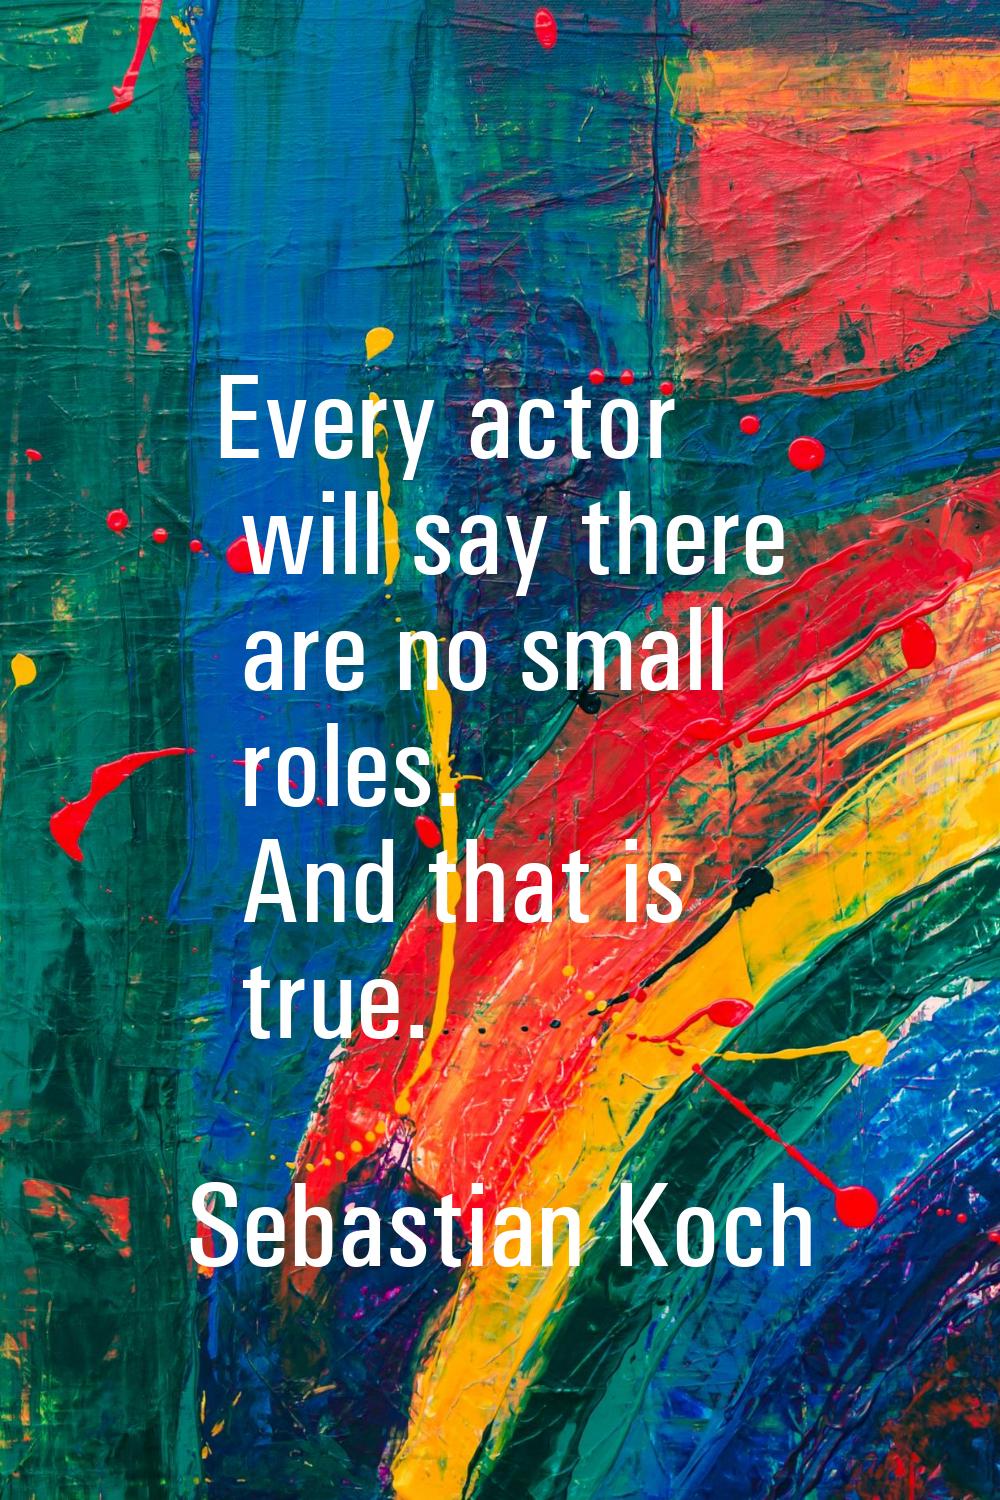 Every actor will say there are no small roles. And that is true.